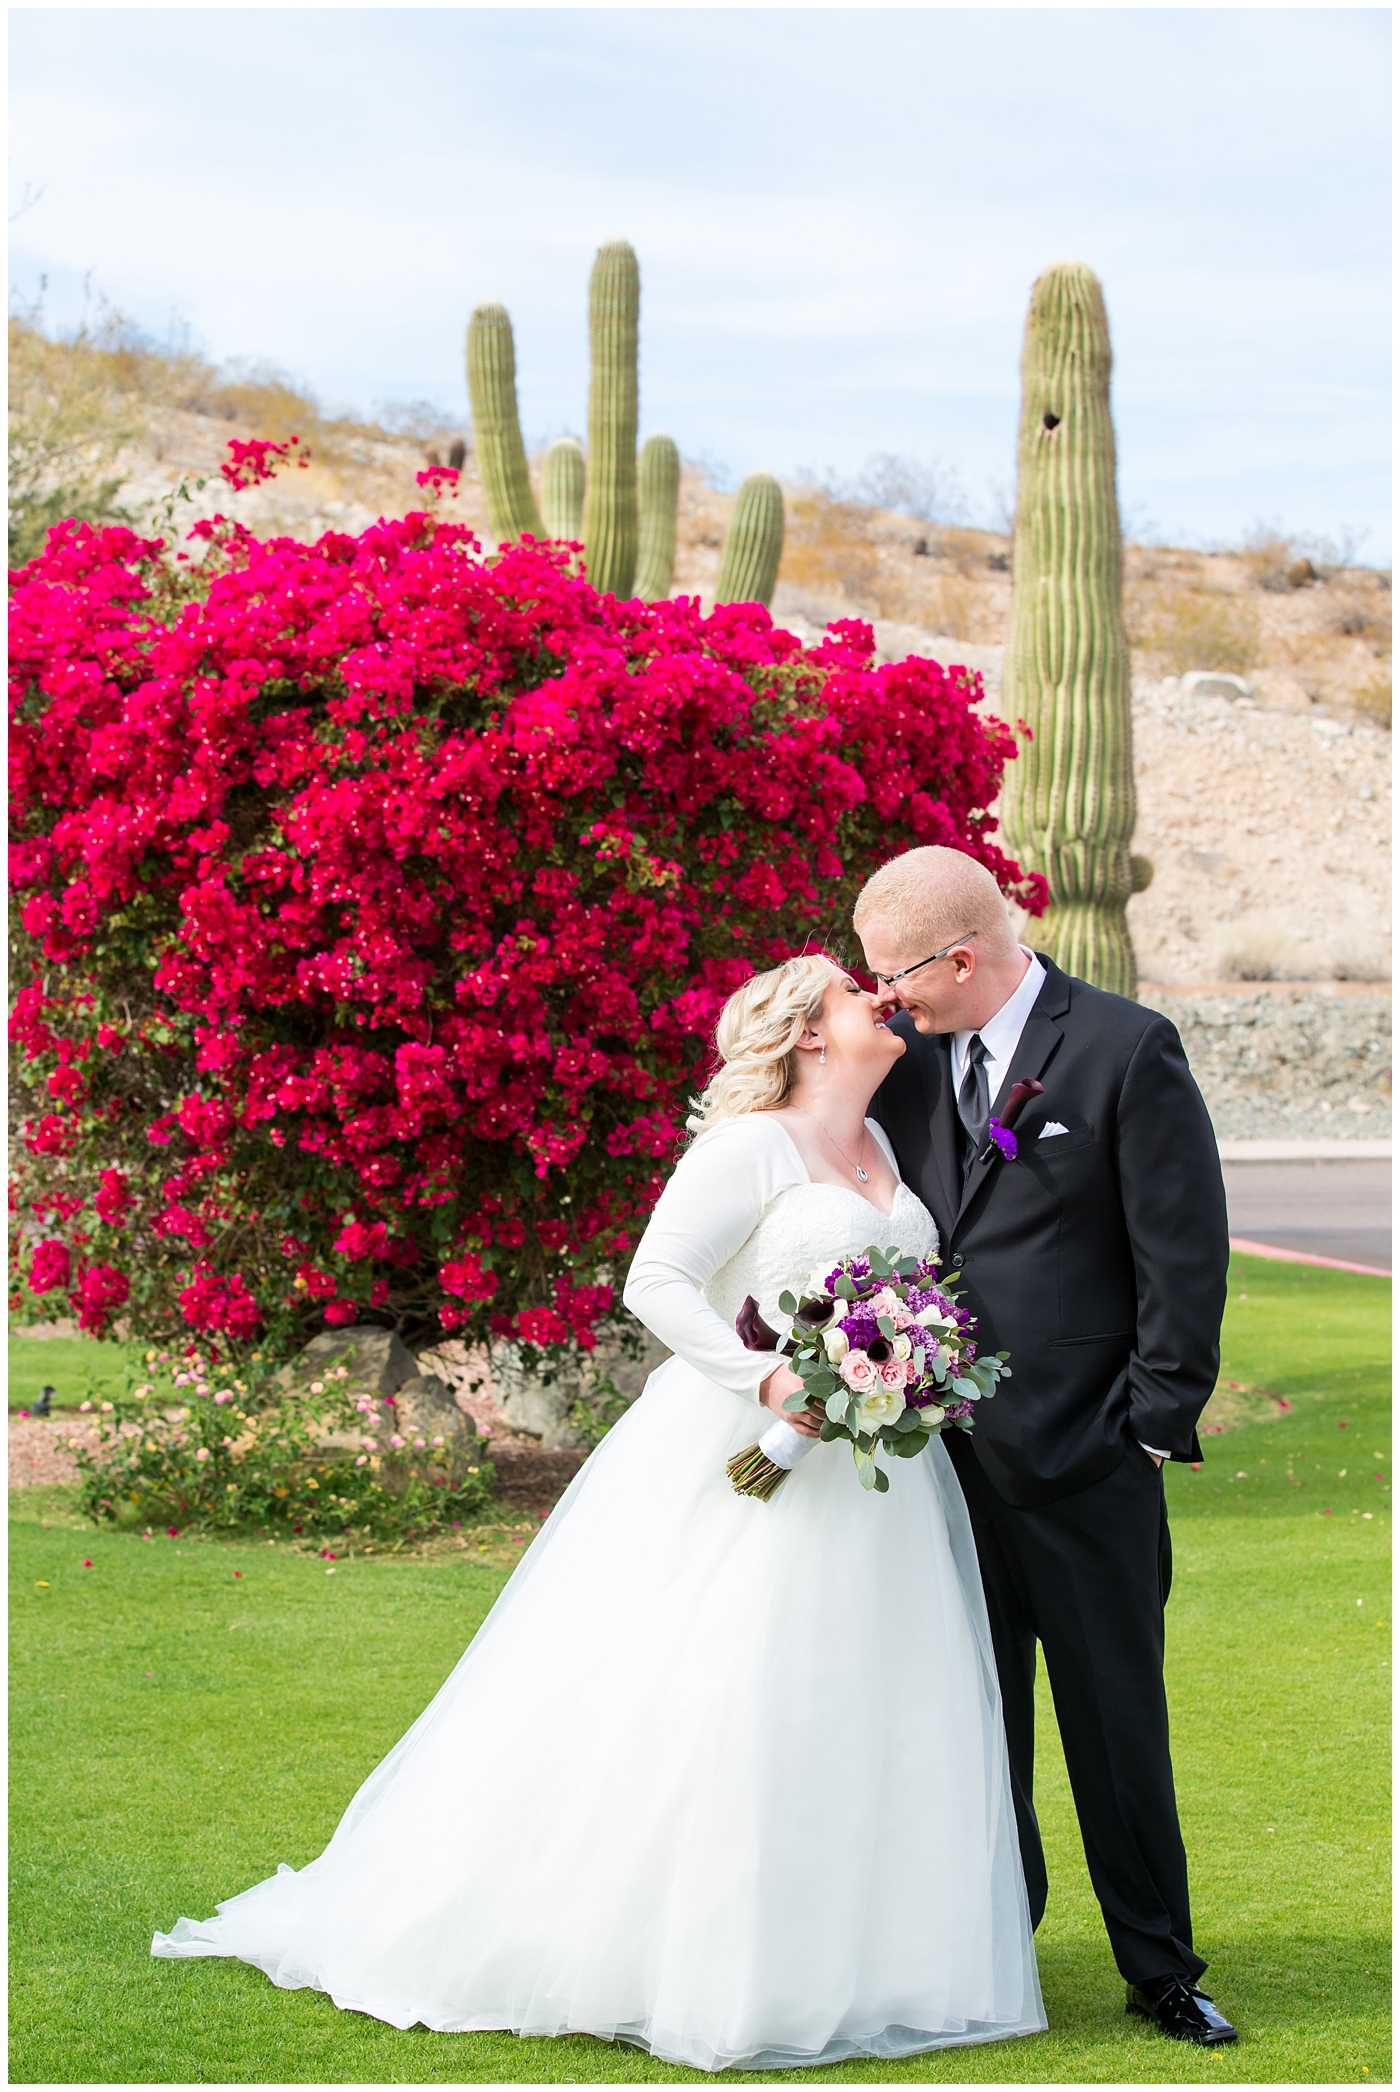 blonde bride in long sleeve wedding dress with purple and white flower bouquet and groom in black suit with purple calla lilly boutonniere wedding day portrait